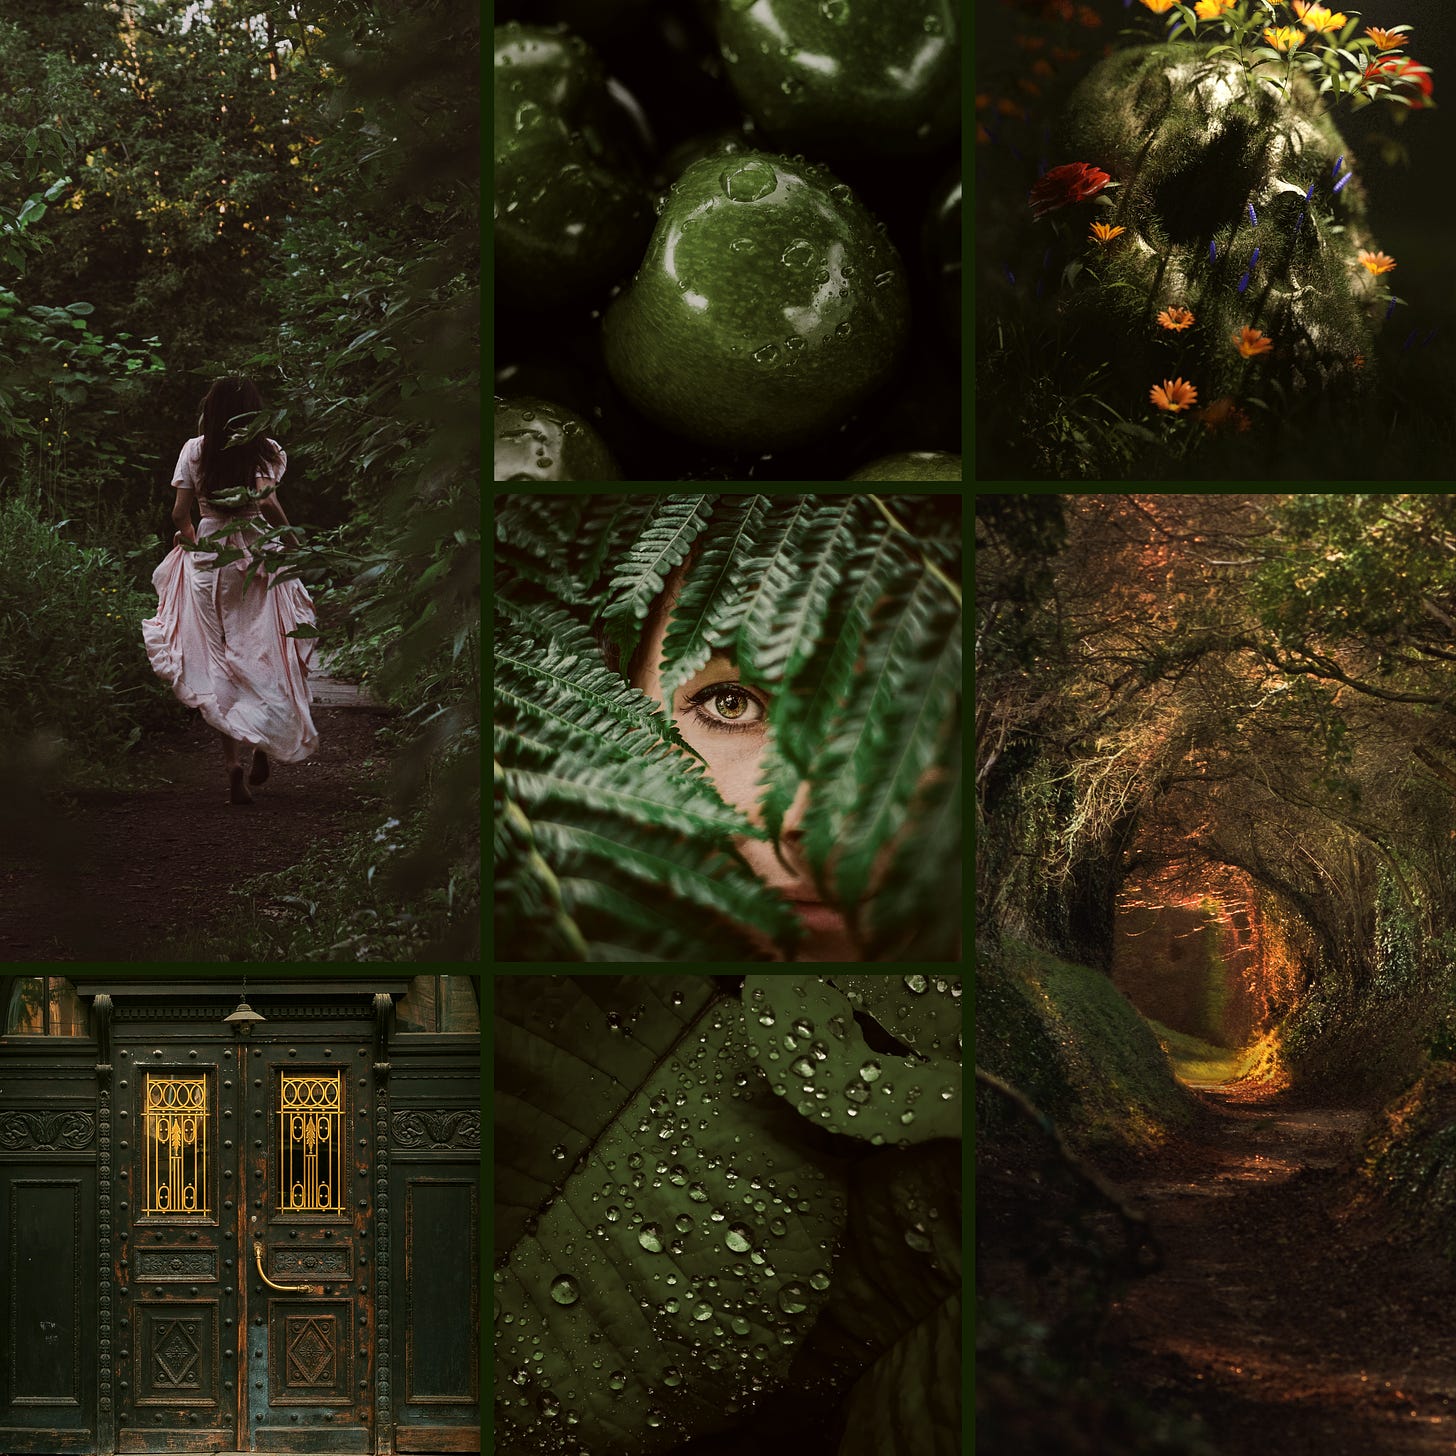 A young woman in a pale pink dress running away through the forest. A bunch of green apples. A skull with flowers growing out of it. A woman looking through fern leaves with only her eye and part of her face exposed. A metal door with gold detailing. A green leaf with water droplets on it. A path through trees that have grown over into the shape of a tunnel.